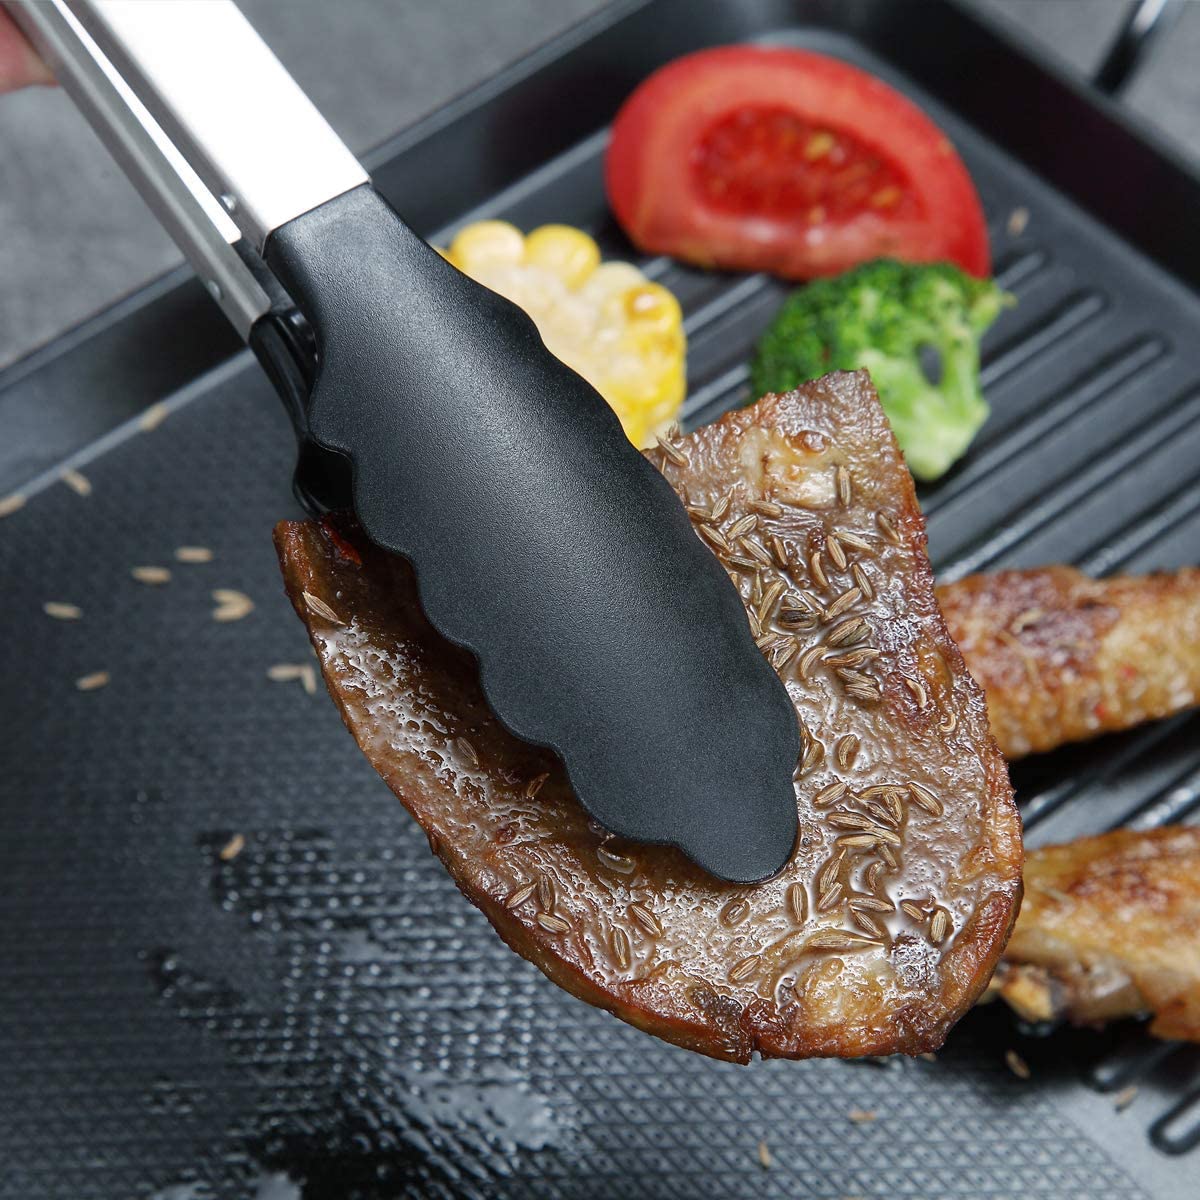 US$ 15.99 - Tongs For Cooking, BBQ Tongs For Cooking With Silicone Tips, Serving  Tongs Pack of 4 - m.